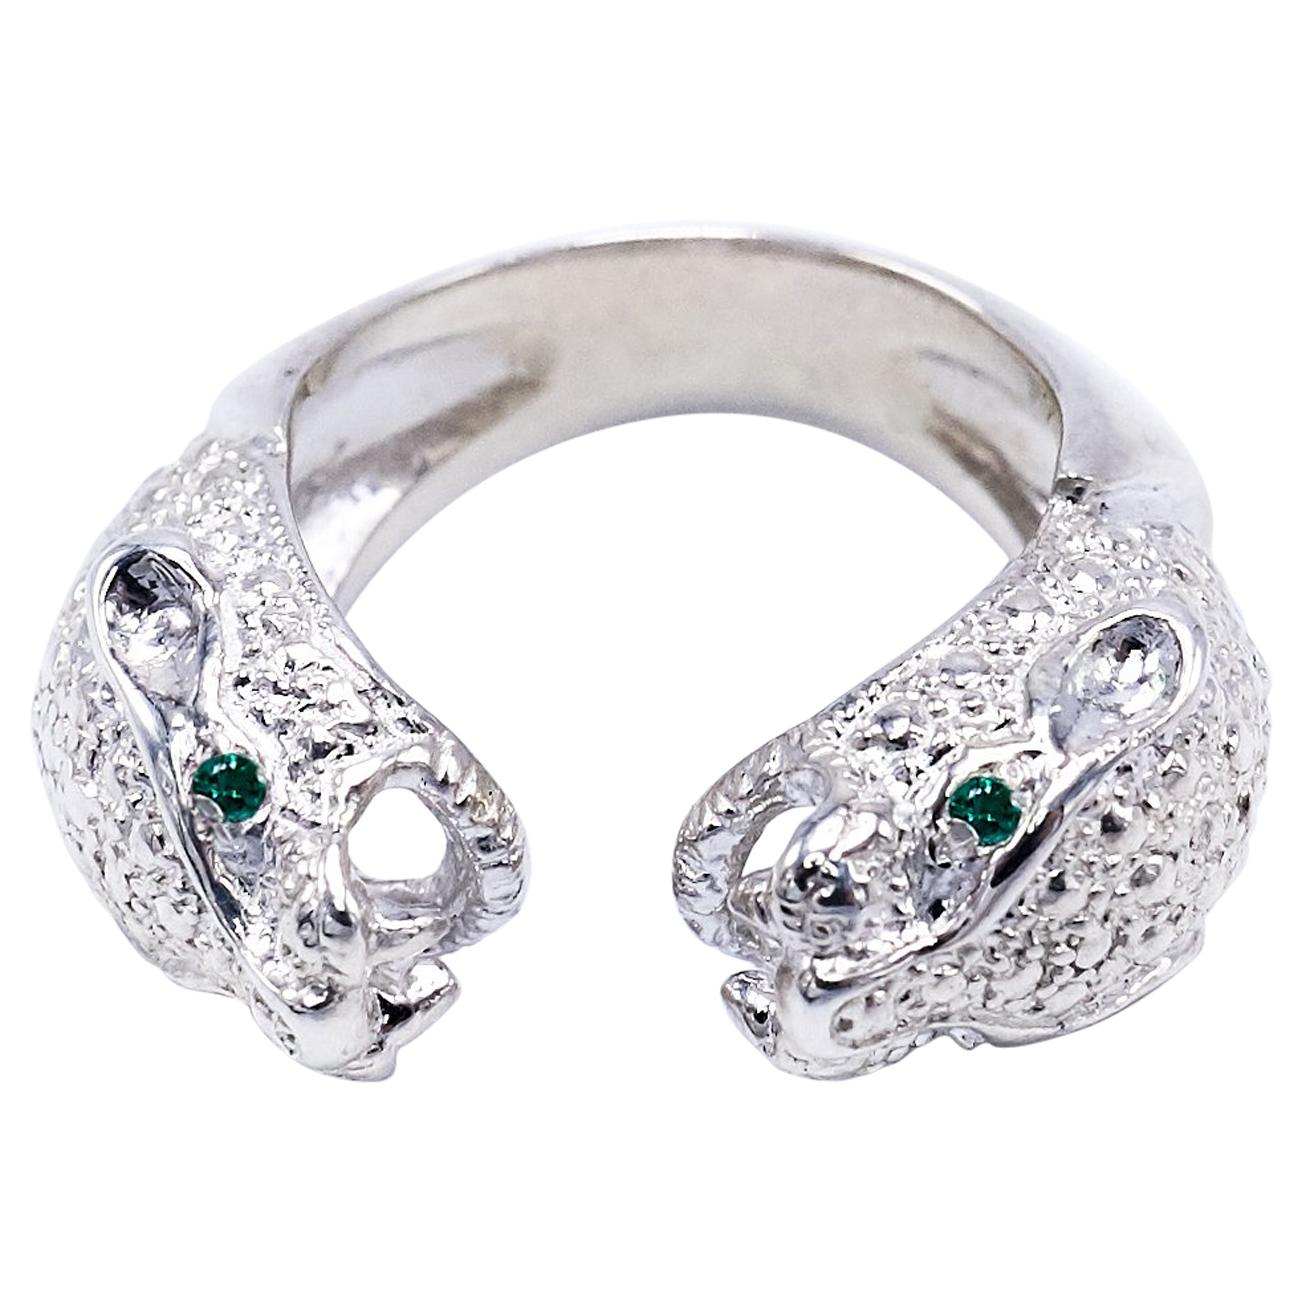 Emerald Double Head Jaguar Ring Sterling Silver Cocktail Statement J Dauphin For Sale